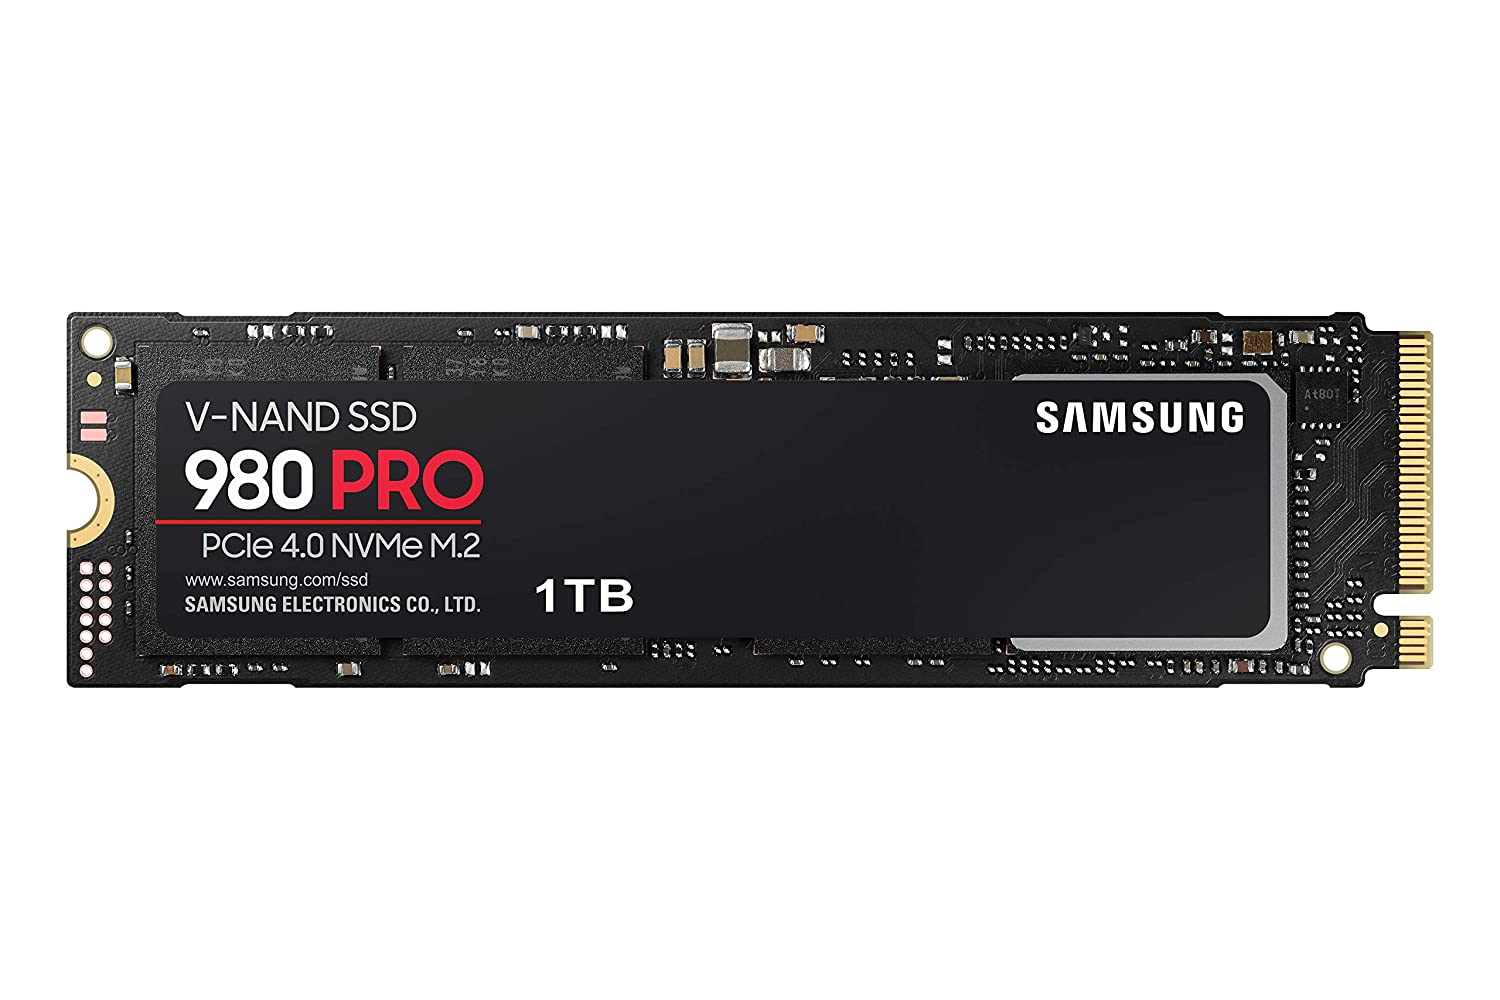 Samsung 980 PRO 1TB Up to 7,000 MB/s PCIe 4.0 NVMe M.2 (2280) Internal Solid State Drive